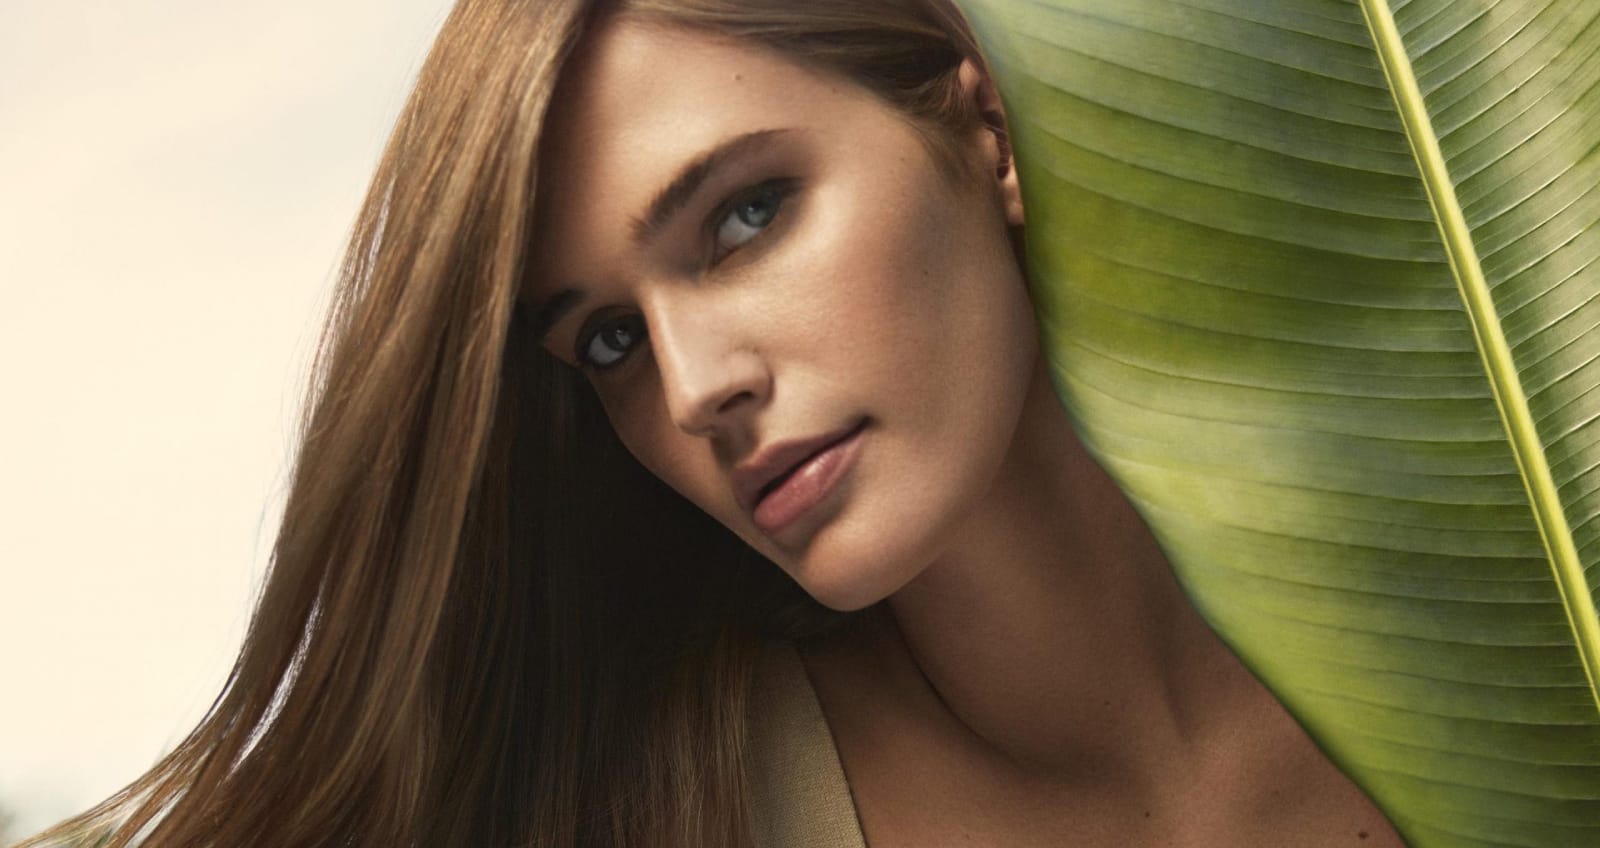 Woman peering around large leaf with hair and makeup done